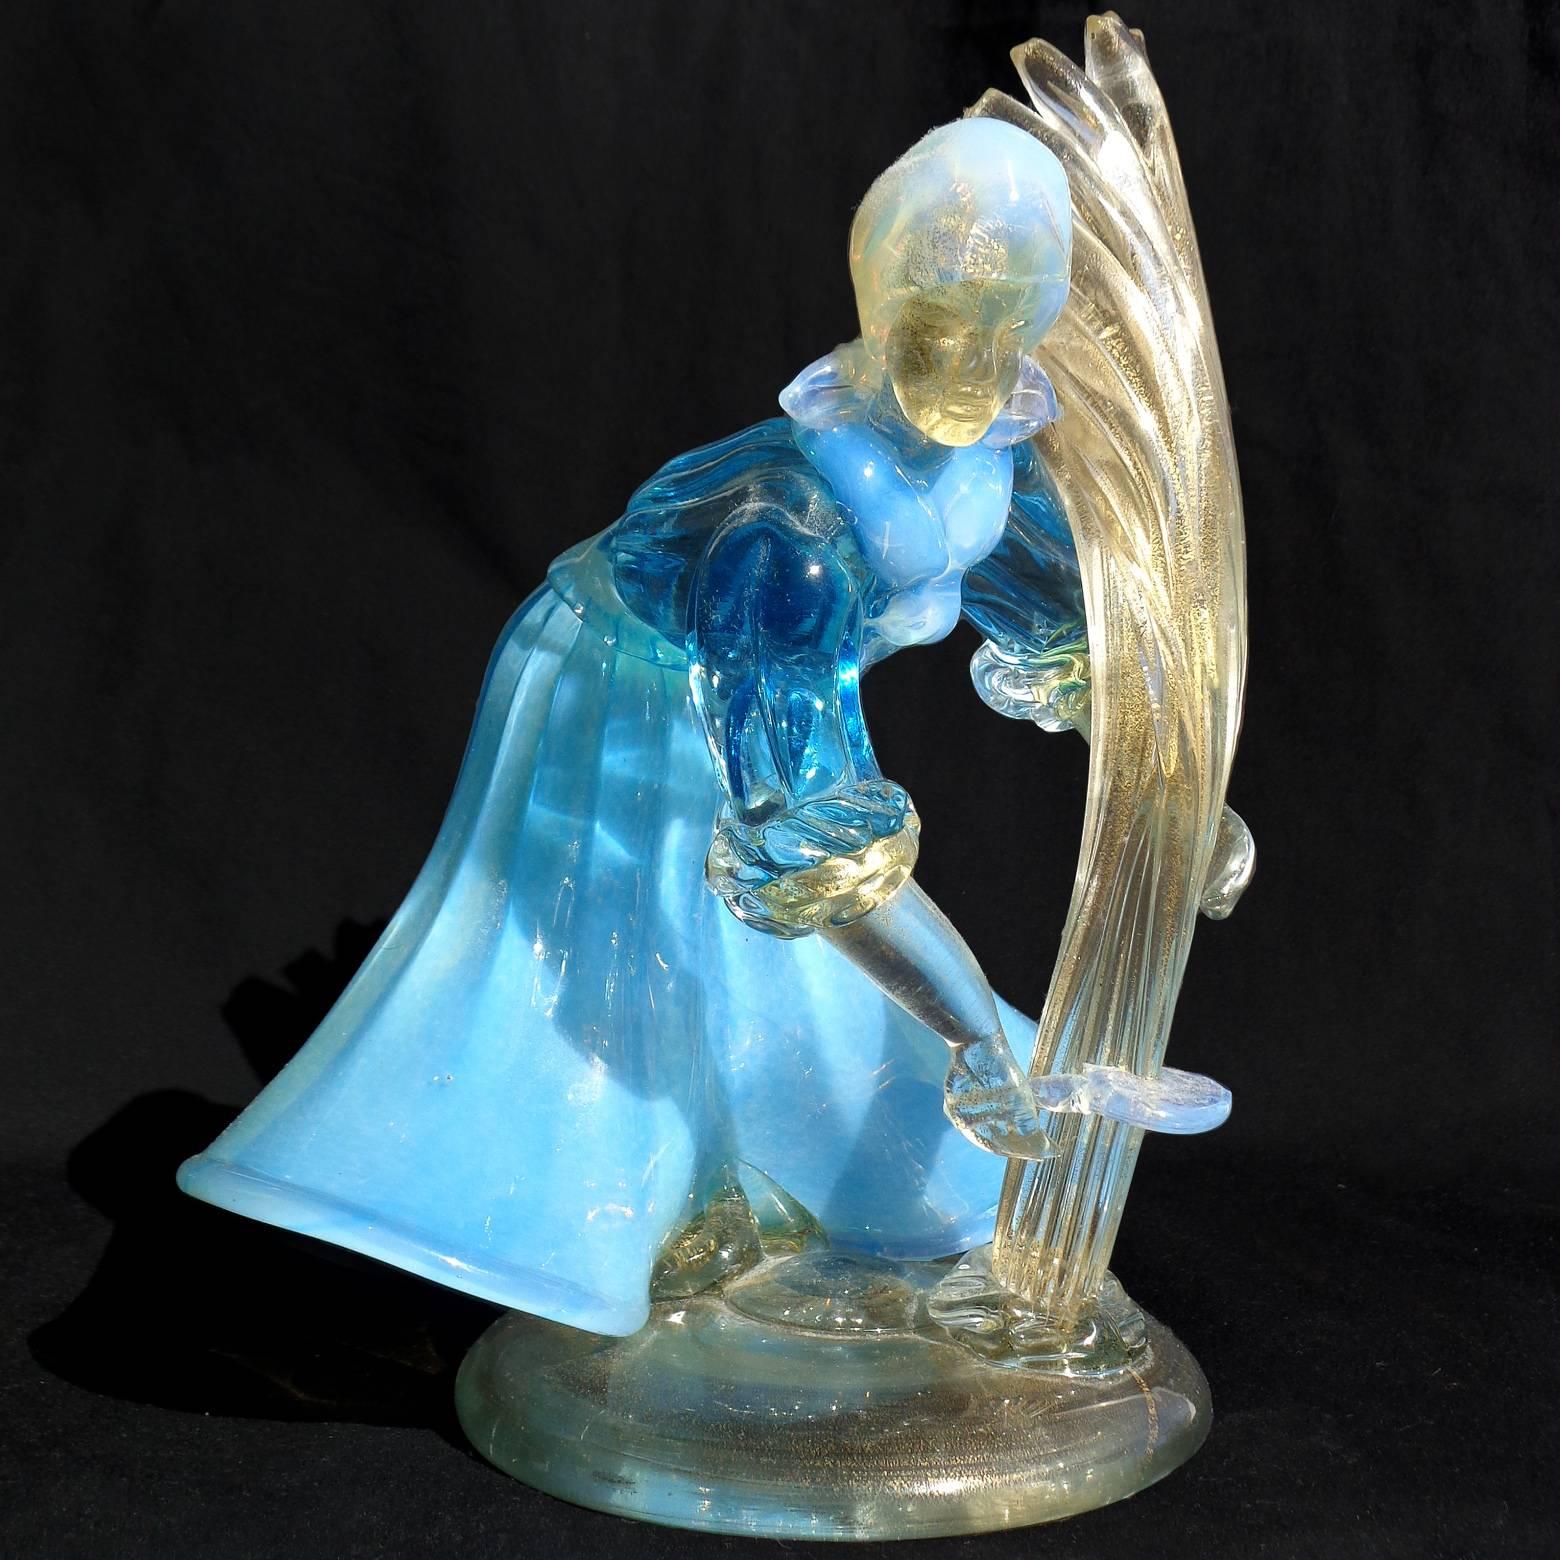 Beautiful vintage Murano hand blown opalescent blue and white, with gold flecks Italian art glass farmer woman figure. Attributed to the A.Ve.M. (Arte Vetraria Muranese) company. The woman is in action, cutting her harvest. As you can see from the